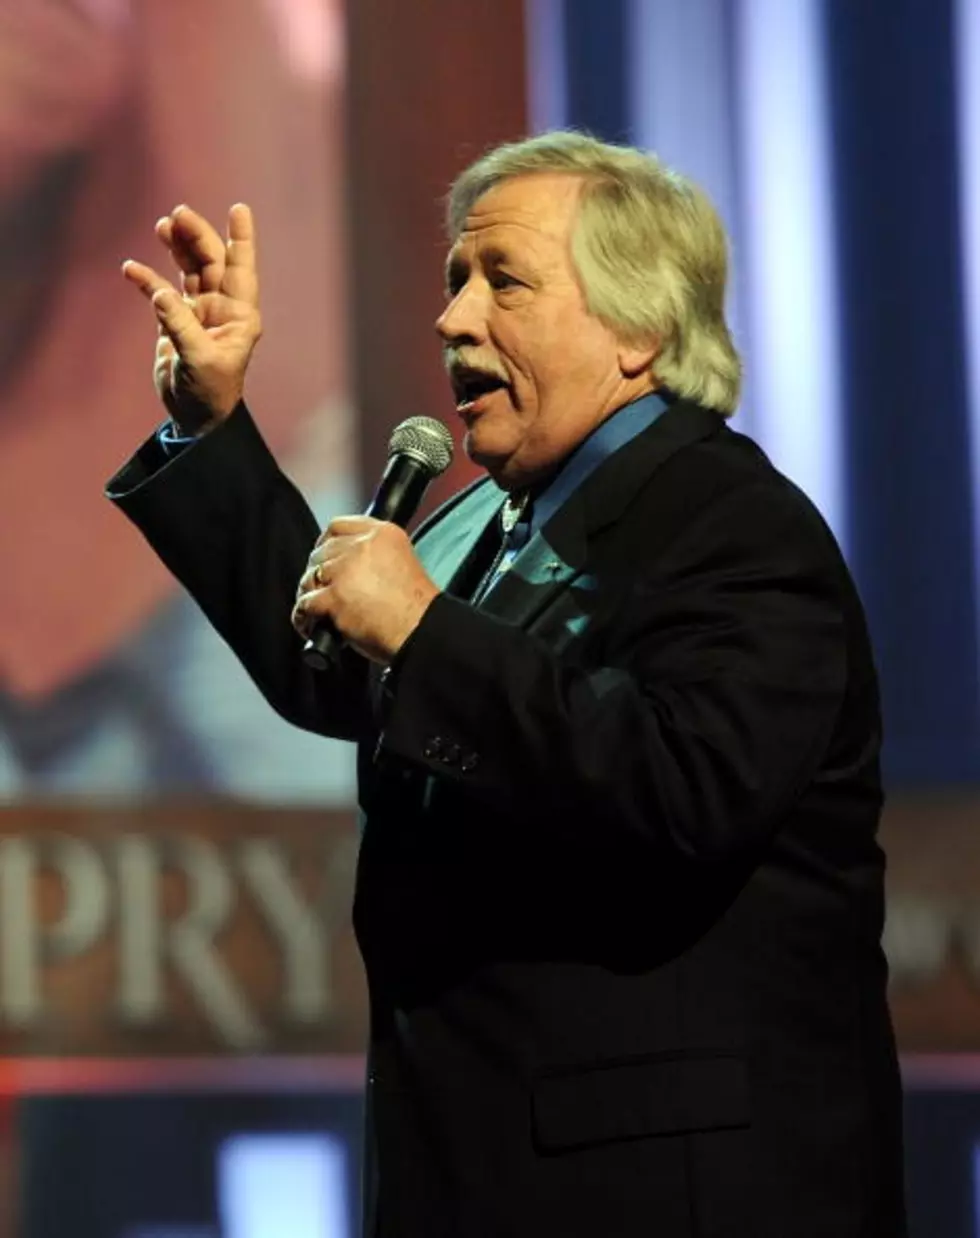 John Conlee in Concert April 11th at Evangeline Downs Racetrack &#038; Casino in Opelousas